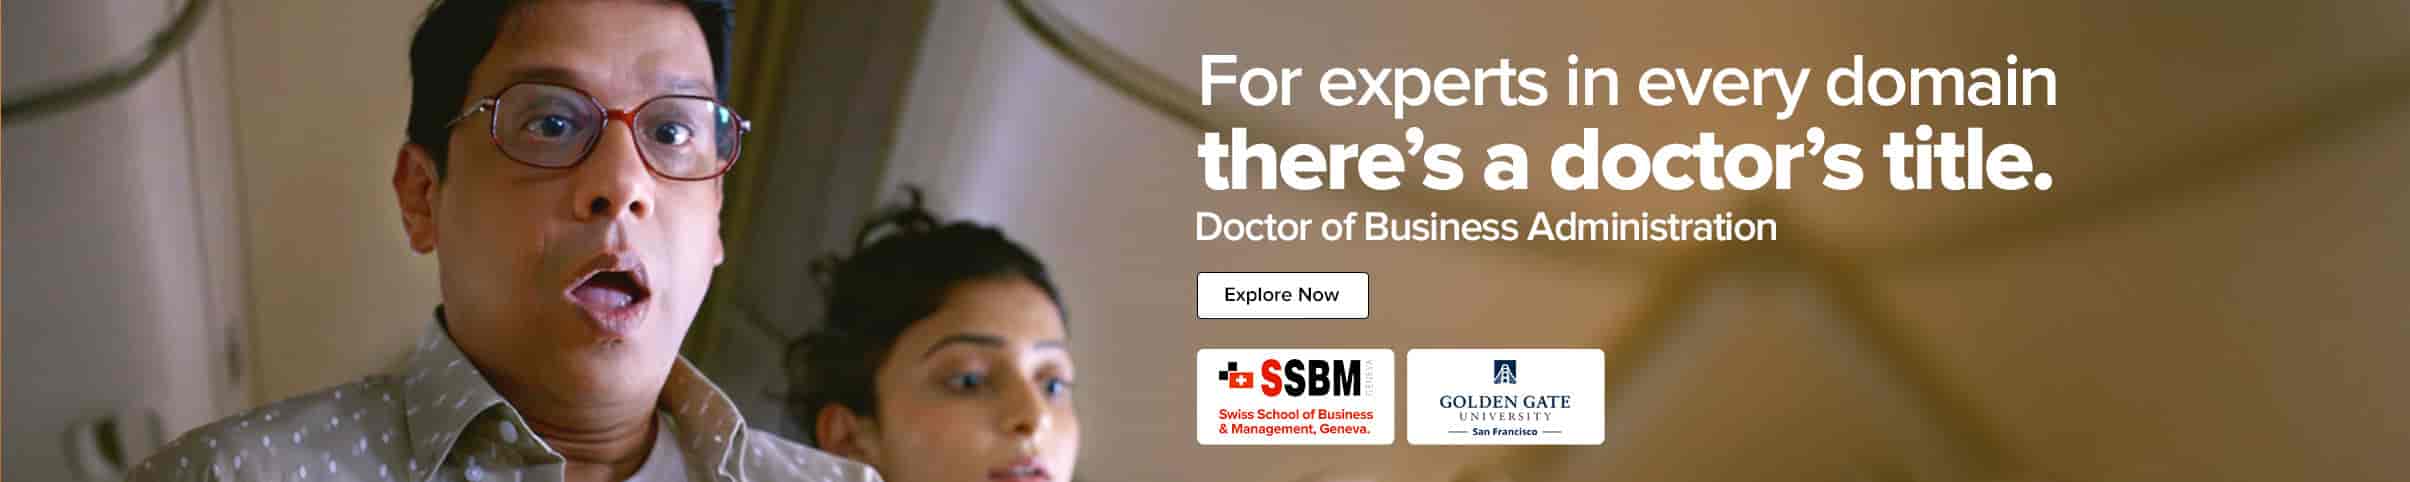 For experts in every domain, there's a doctor's title